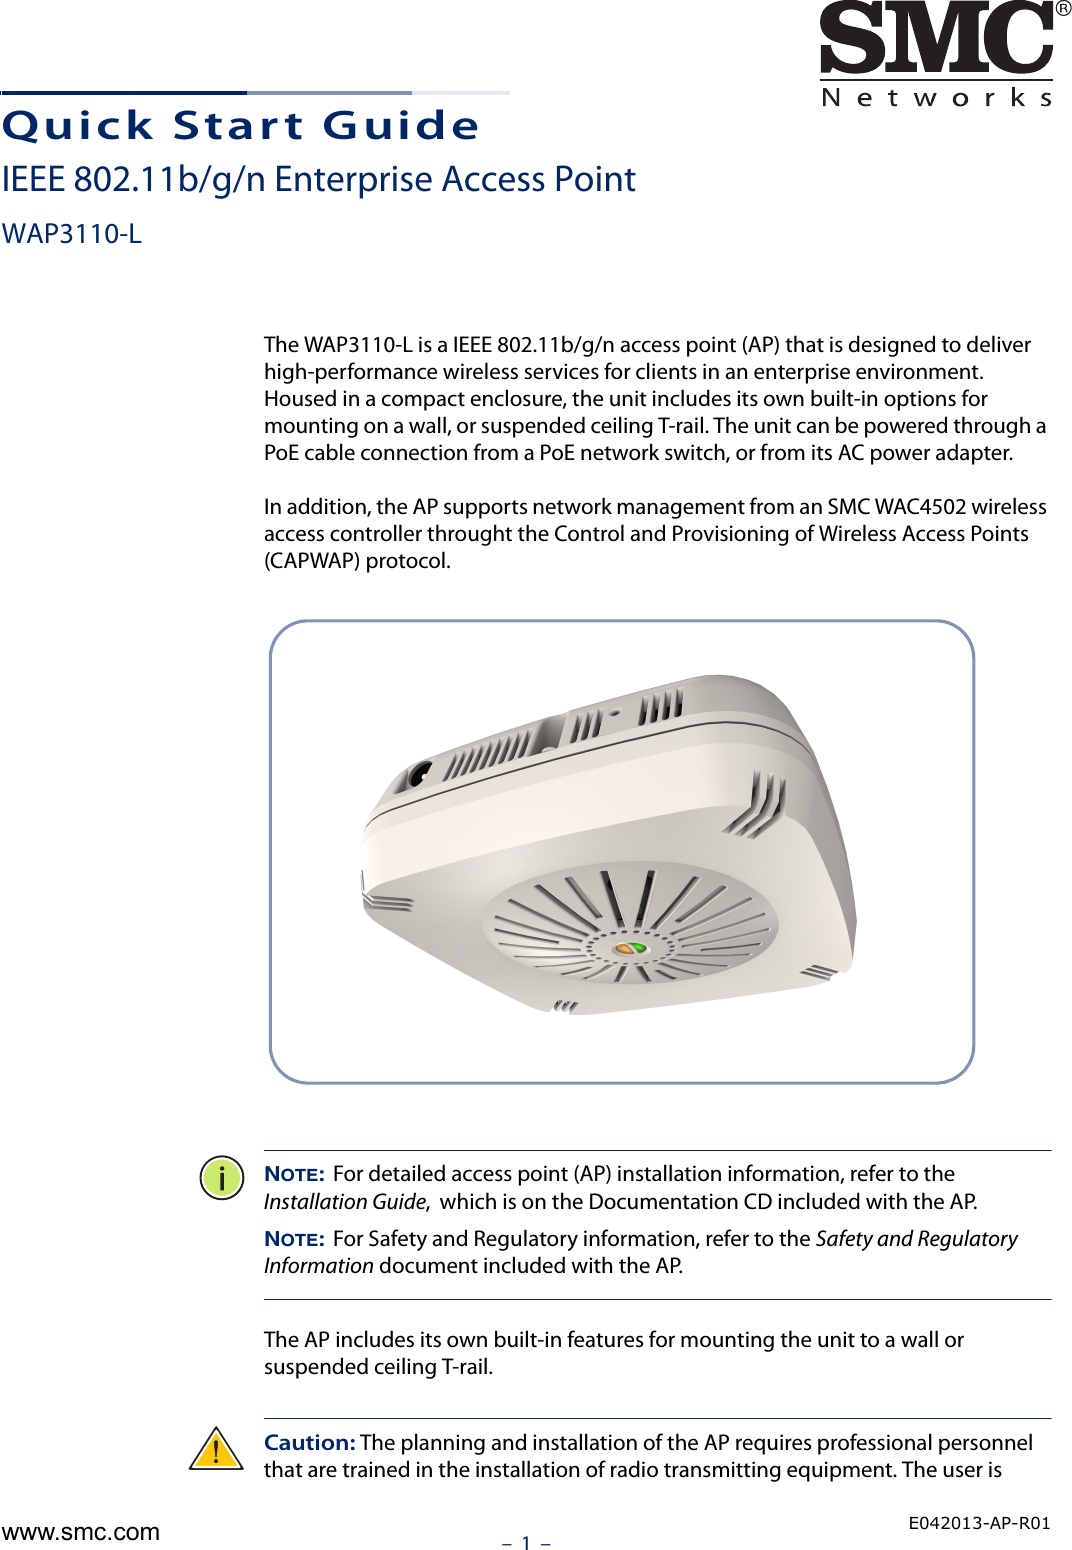 –  1  –Quick Start GuideIEEE 802.11b/g/n Enterprise Access PointWAP3110-LThe WAP3110-L is a IEEE 802.11b/g/n access point (AP) that is designed to deliver high-performance wireless services for clients in an enterprise environment. Housed in a compact enclosure, the unit includes its own built-in options for mounting on a wall, or suspended ceiling T-rail. The unit can be powered through a PoE cable connection from a PoE network switch, or from its AC power adapter.In addition, the AP supports network management from an SMC WAC4502 wireless access controller throught the Control and Provisioning of Wireless Access Points (CAPWAP) protocol.NOTE: For detailed access point (AP) installation information, refer to the Installation Guide,  which is on the Documentation CD included with the AP.NOTE: For Safety and Regulatory information, refer to the Safety and Regulatory Information document included with the AP.The AP includes its own built-in features for mounting the unit to a wall or suspended ceiling T-rail. Caution: The planning and installation of the AP requires professional personnel that are trained in the installation of radio transmitting equipment. The user is E042013-AP-R01www.smc.com